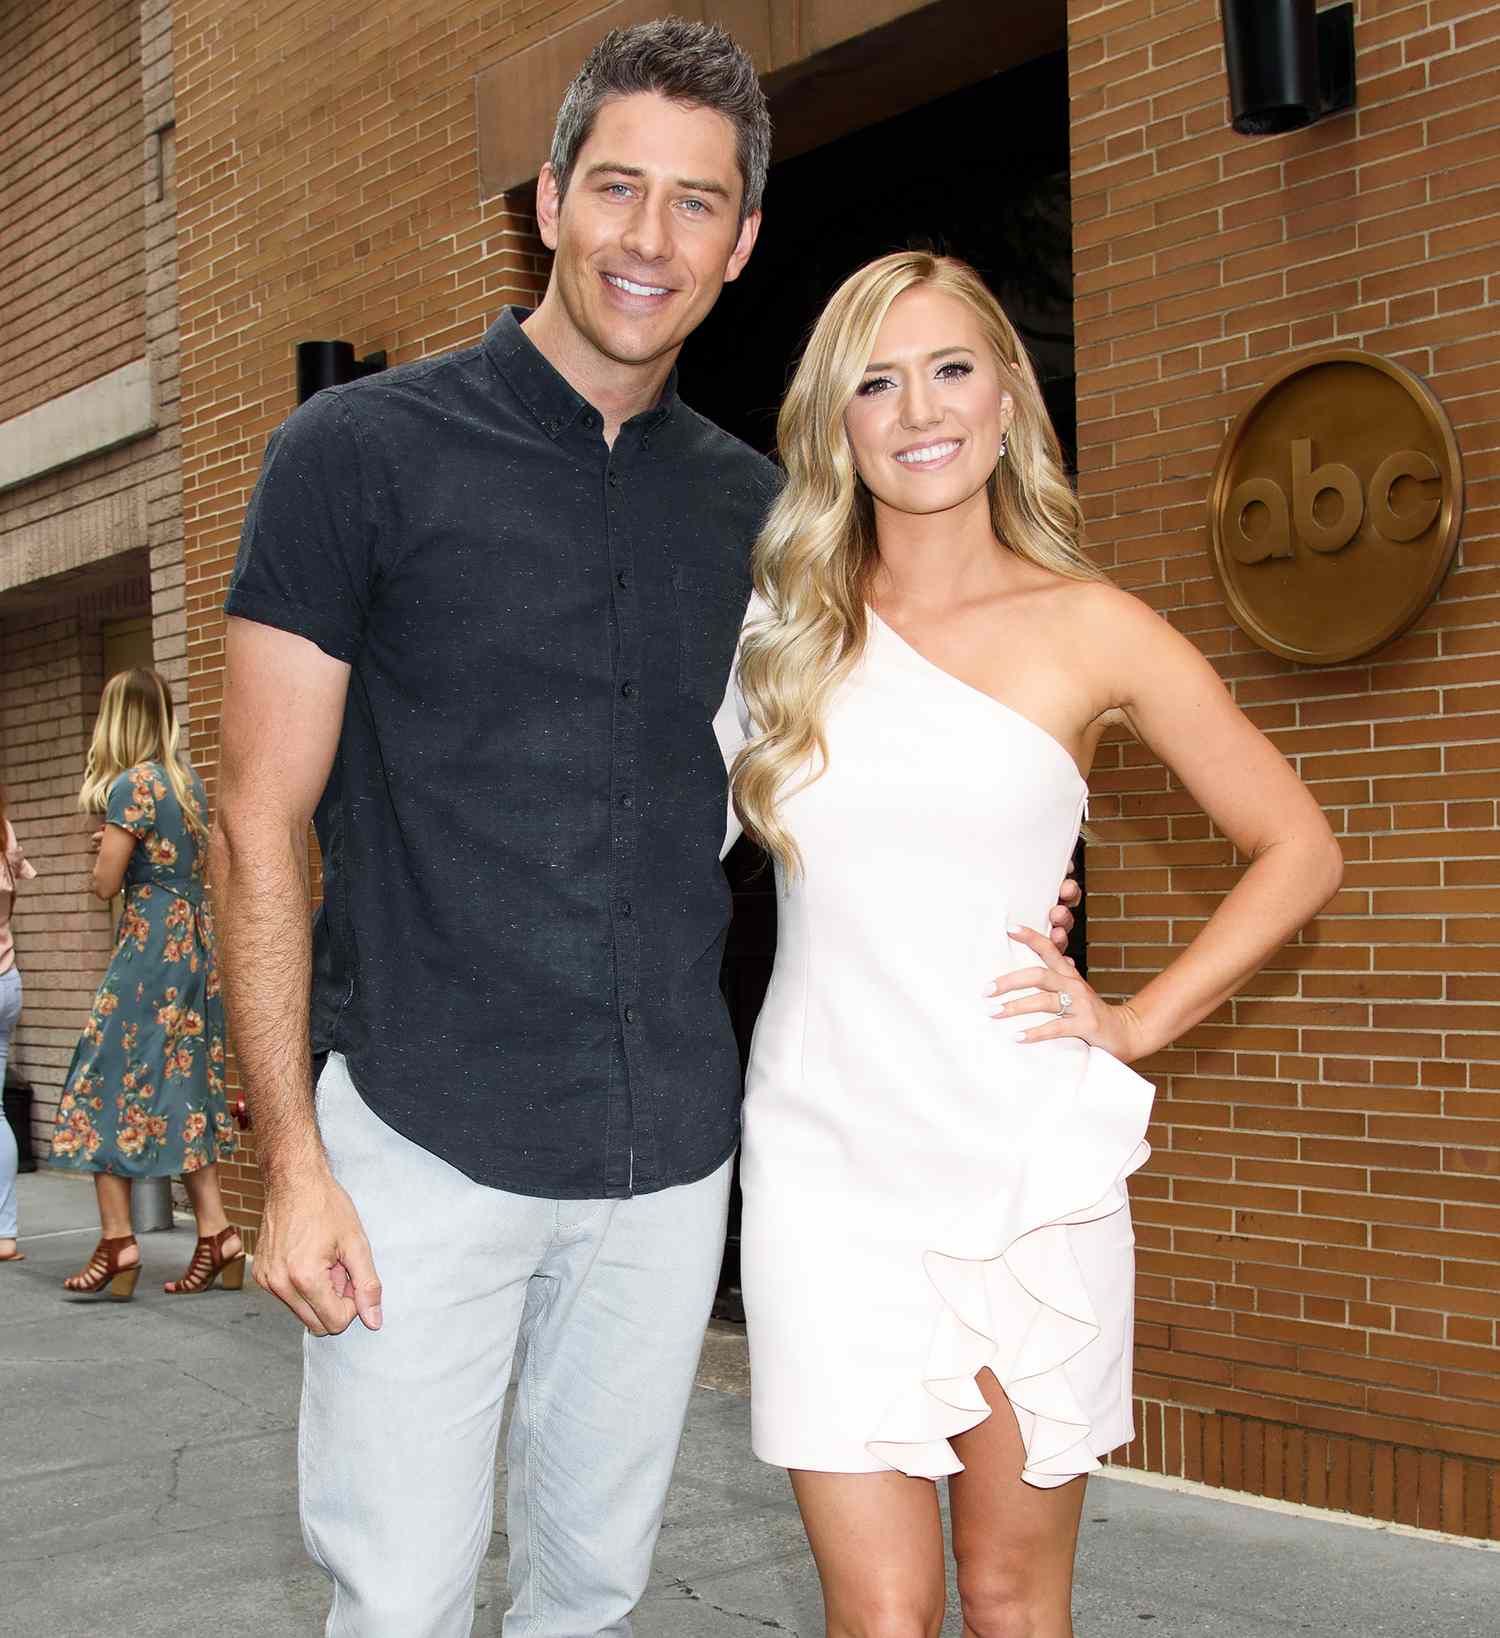 The Bachelor's Arie Luyendyk Jr. and Lauren Burnham Are All Smiles After Announcing Wedding Date-NY